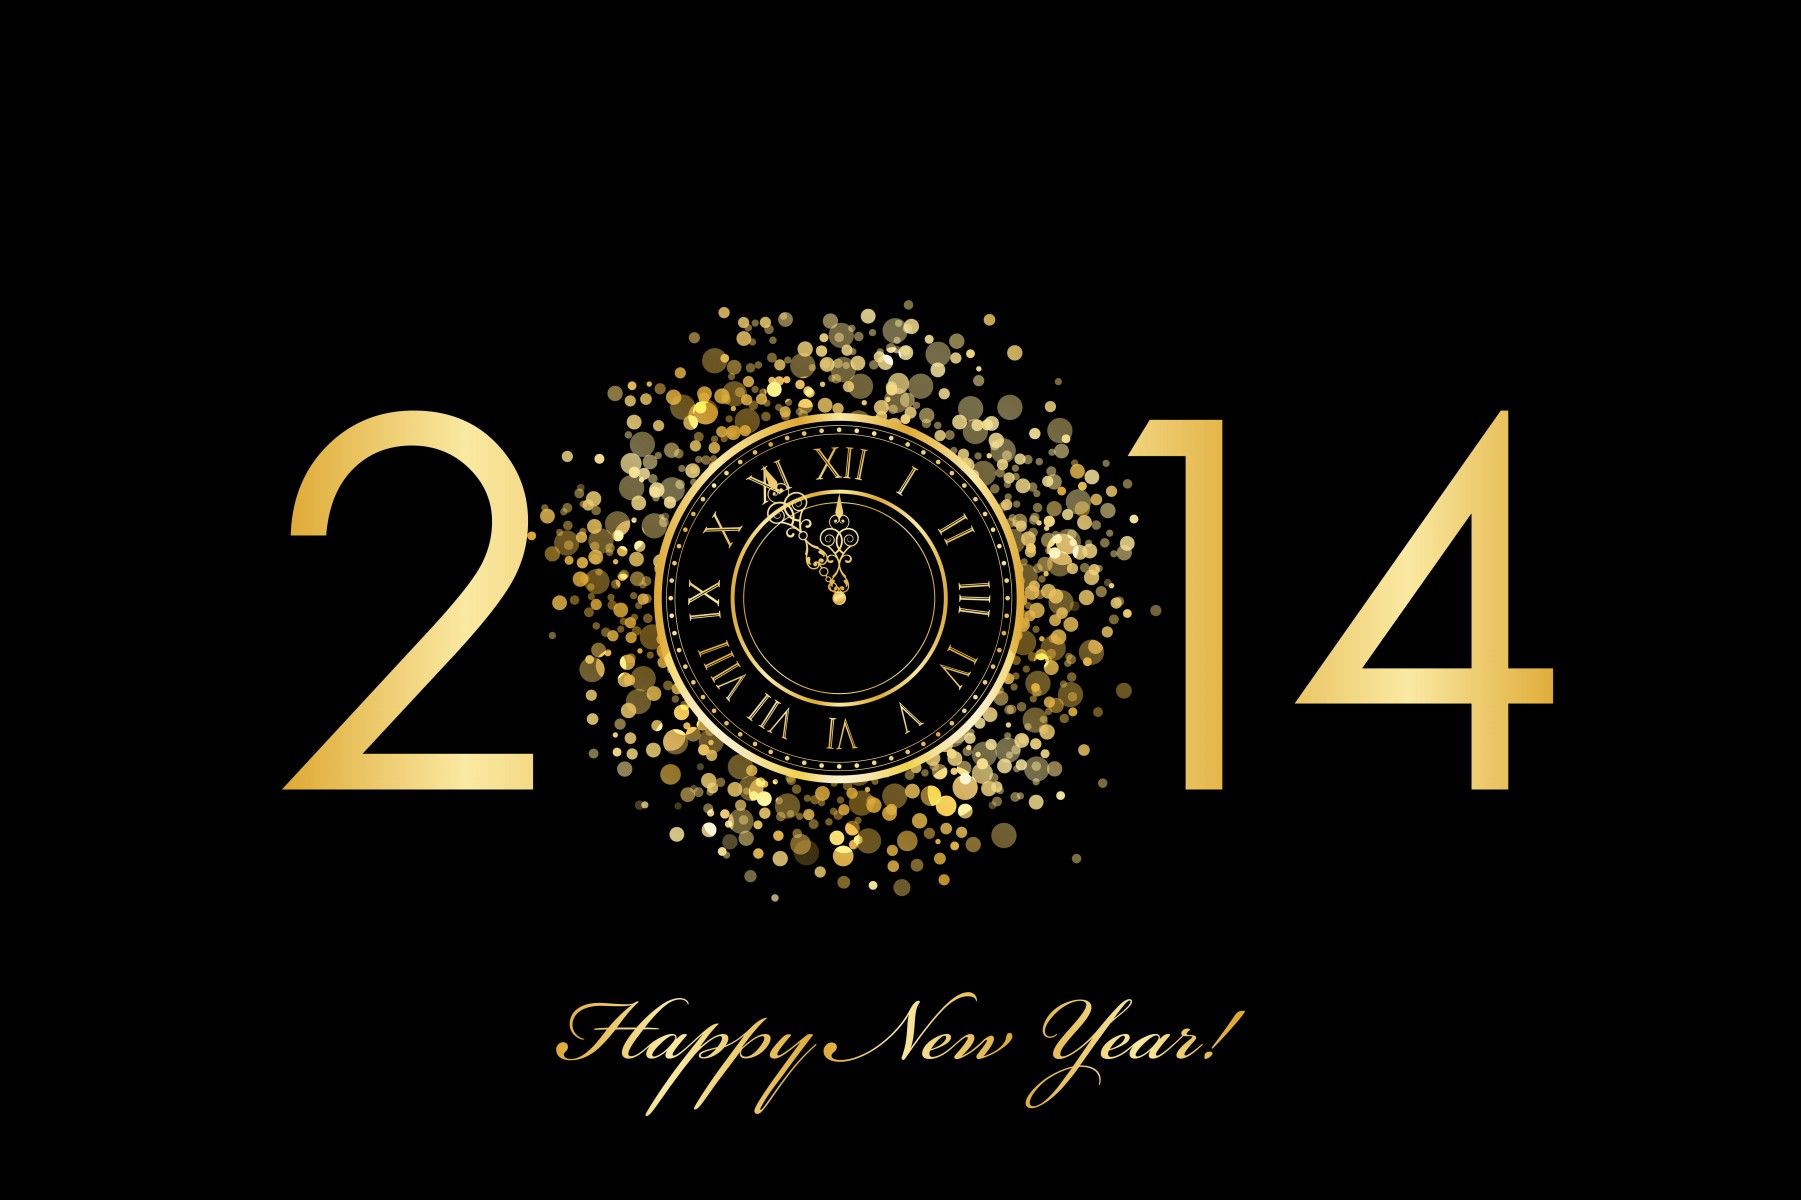 30 Outstanding New Year Wallpaper For 2015 - ImpFashion - All News